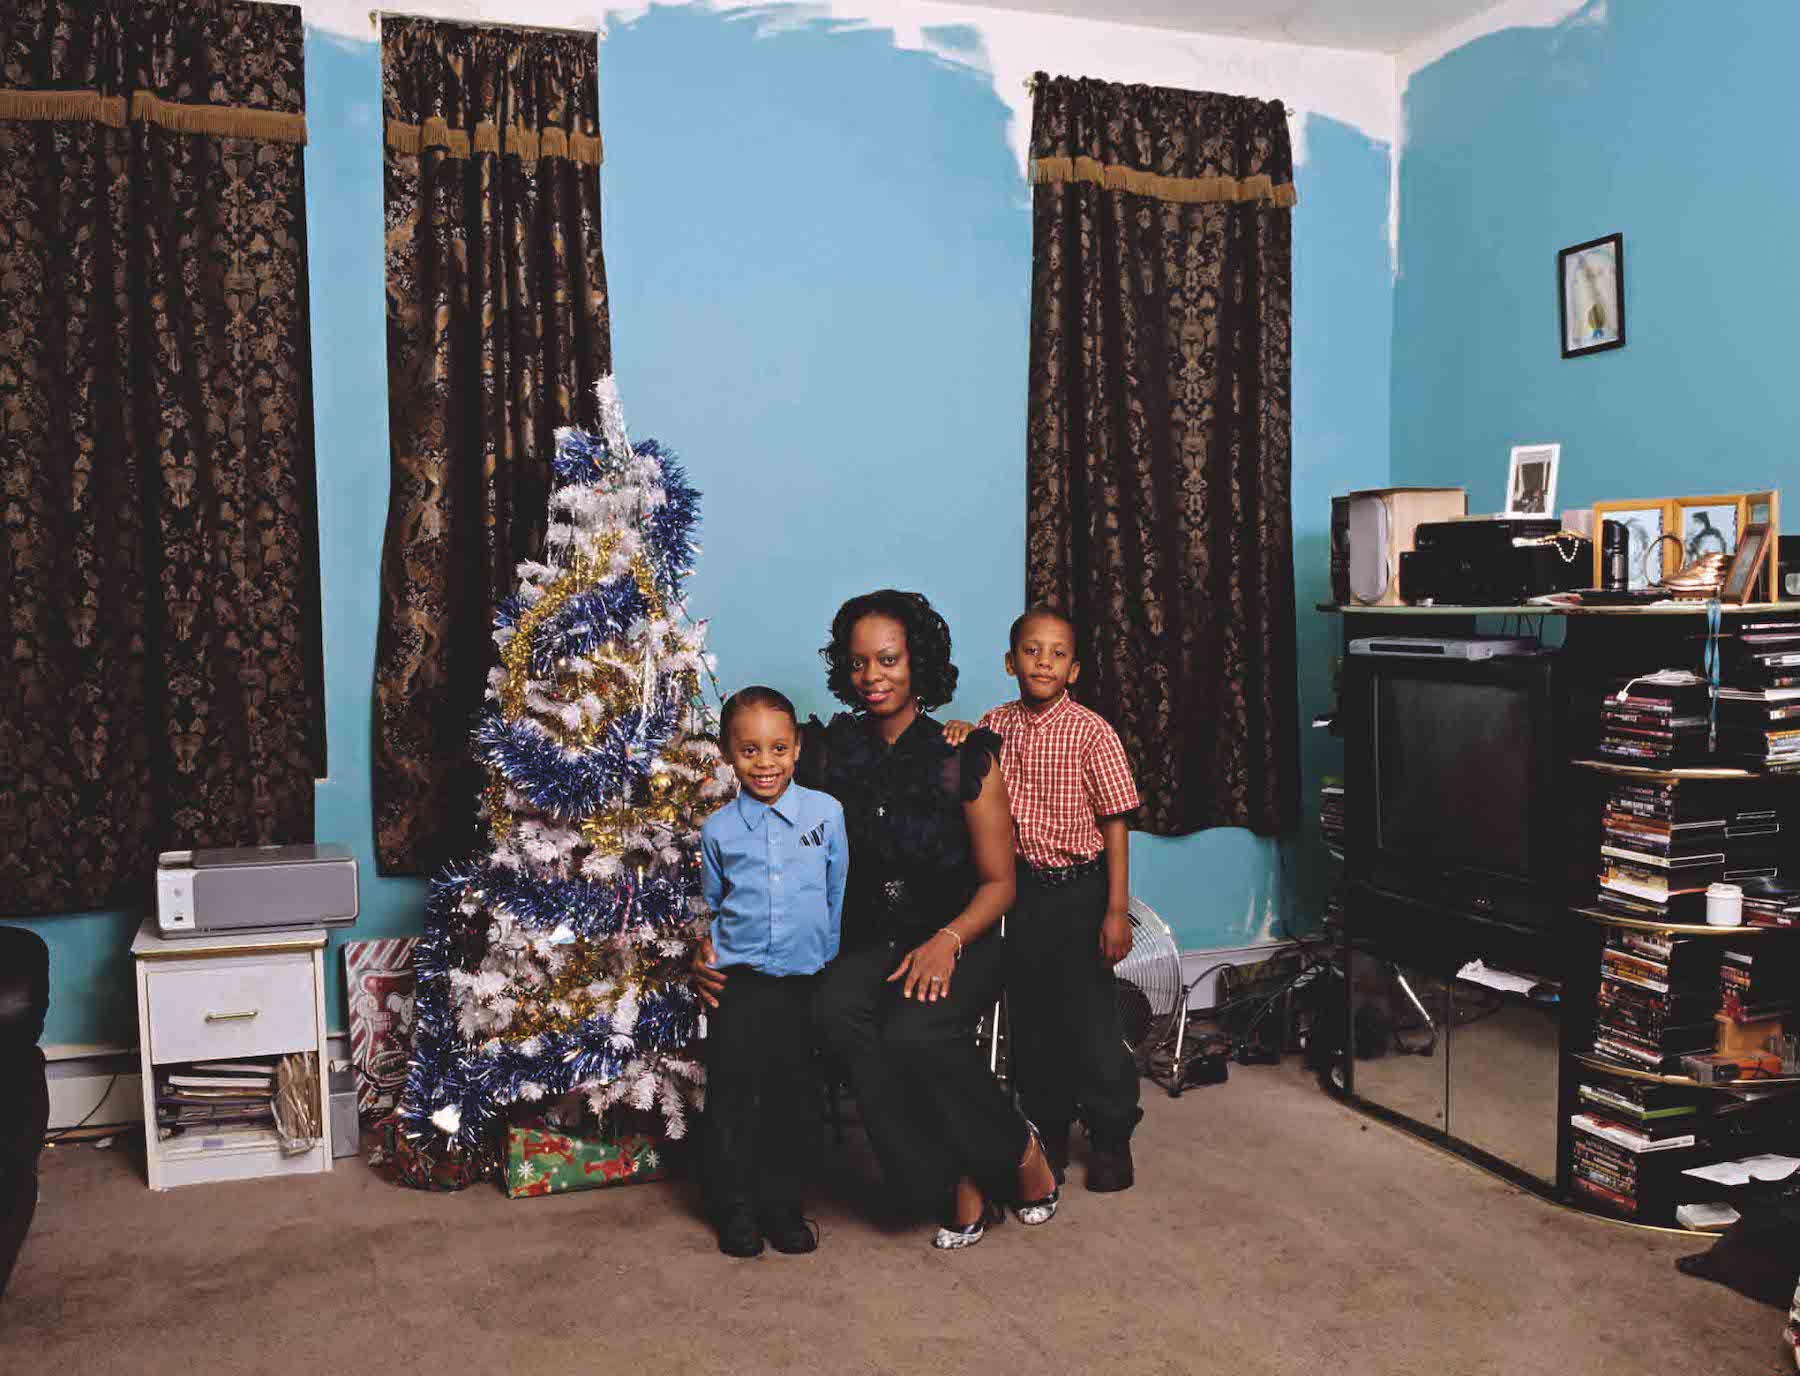 A woman and two boys with a medium-dark skin tone pose in front of a Christmas tree in formal attire. The Christmas tree is covered in gold, white, and blue tinsel. The light-blue wall behind them is only painted partly, giving the room an unfinished or impoverished air.